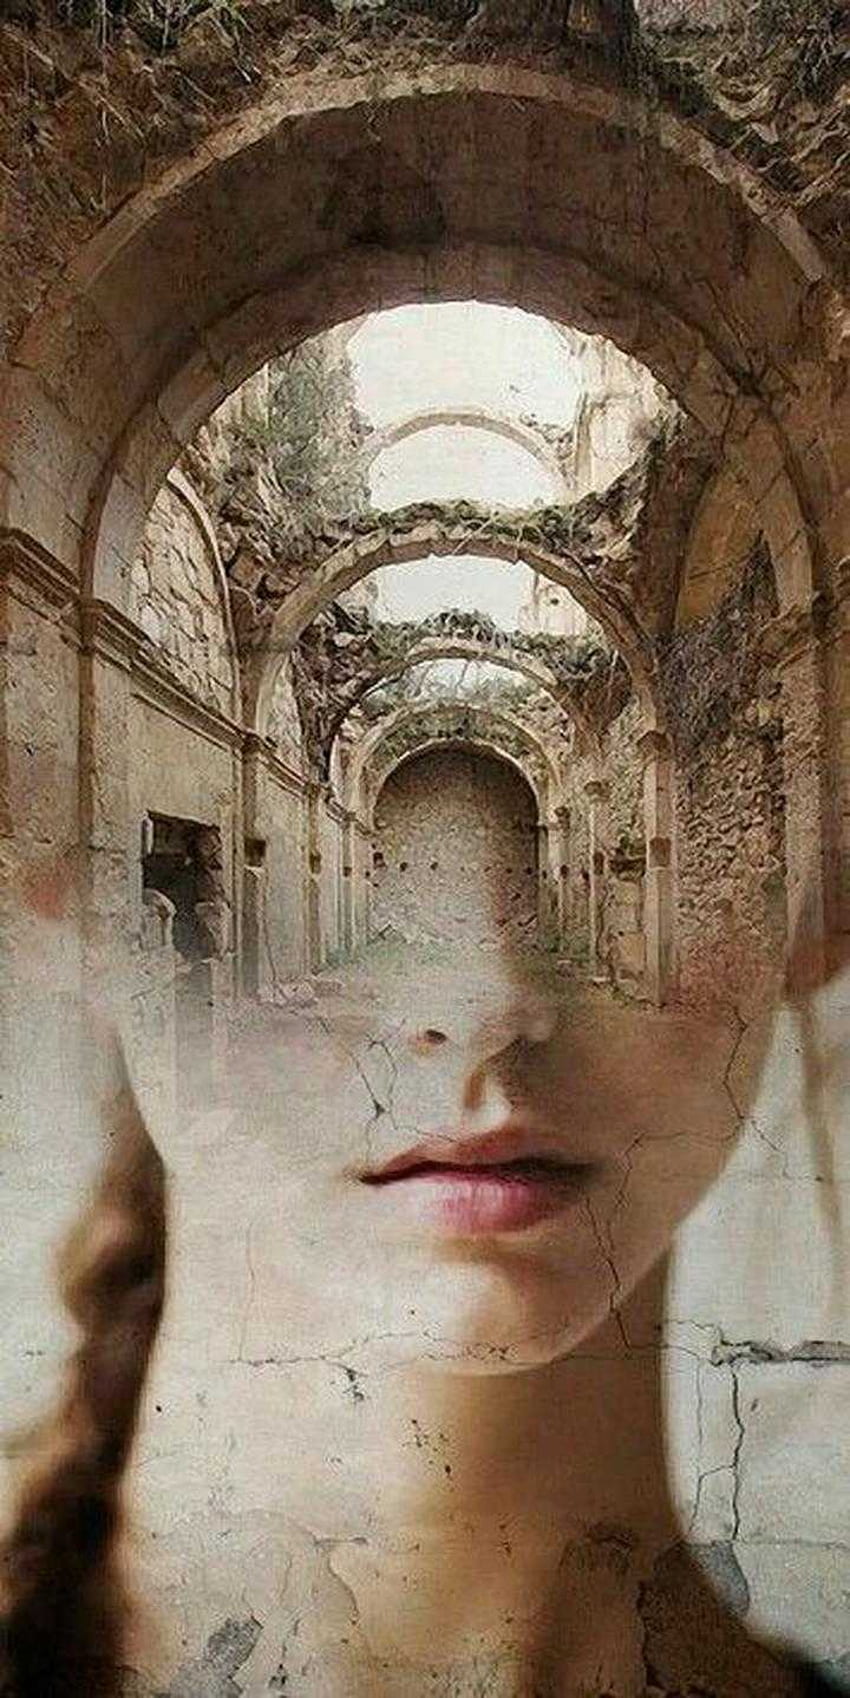 The image is a photograph of a face superimposed over a photograph of an arched walkway. - Dark academia, light academia, Goblincore